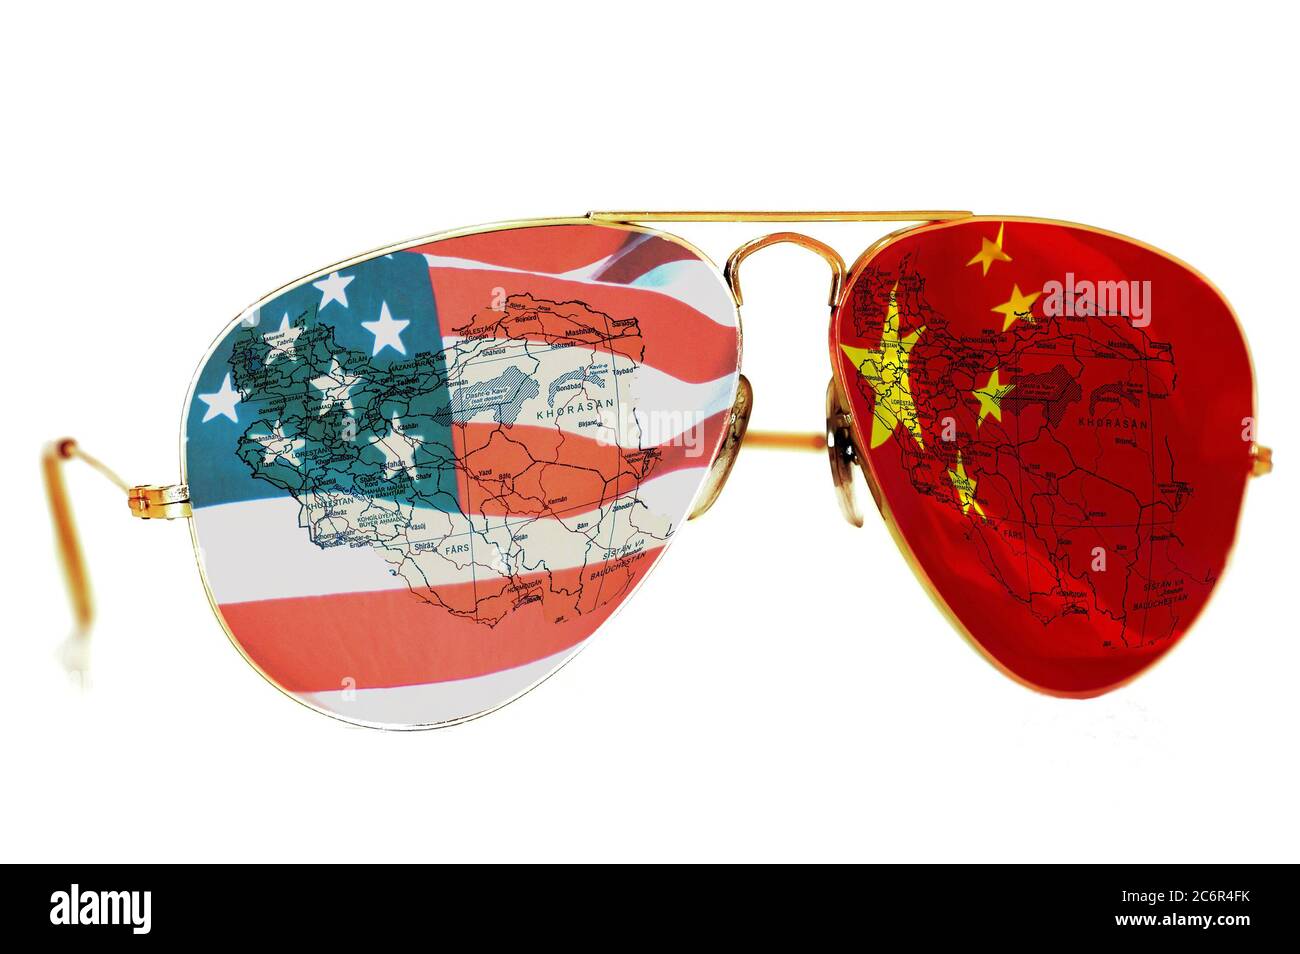 BELGRADE, SERBIA  December 17, 2017:Sunglasses with an American and Chinese flag and a map of Iran on white background Stock Photo